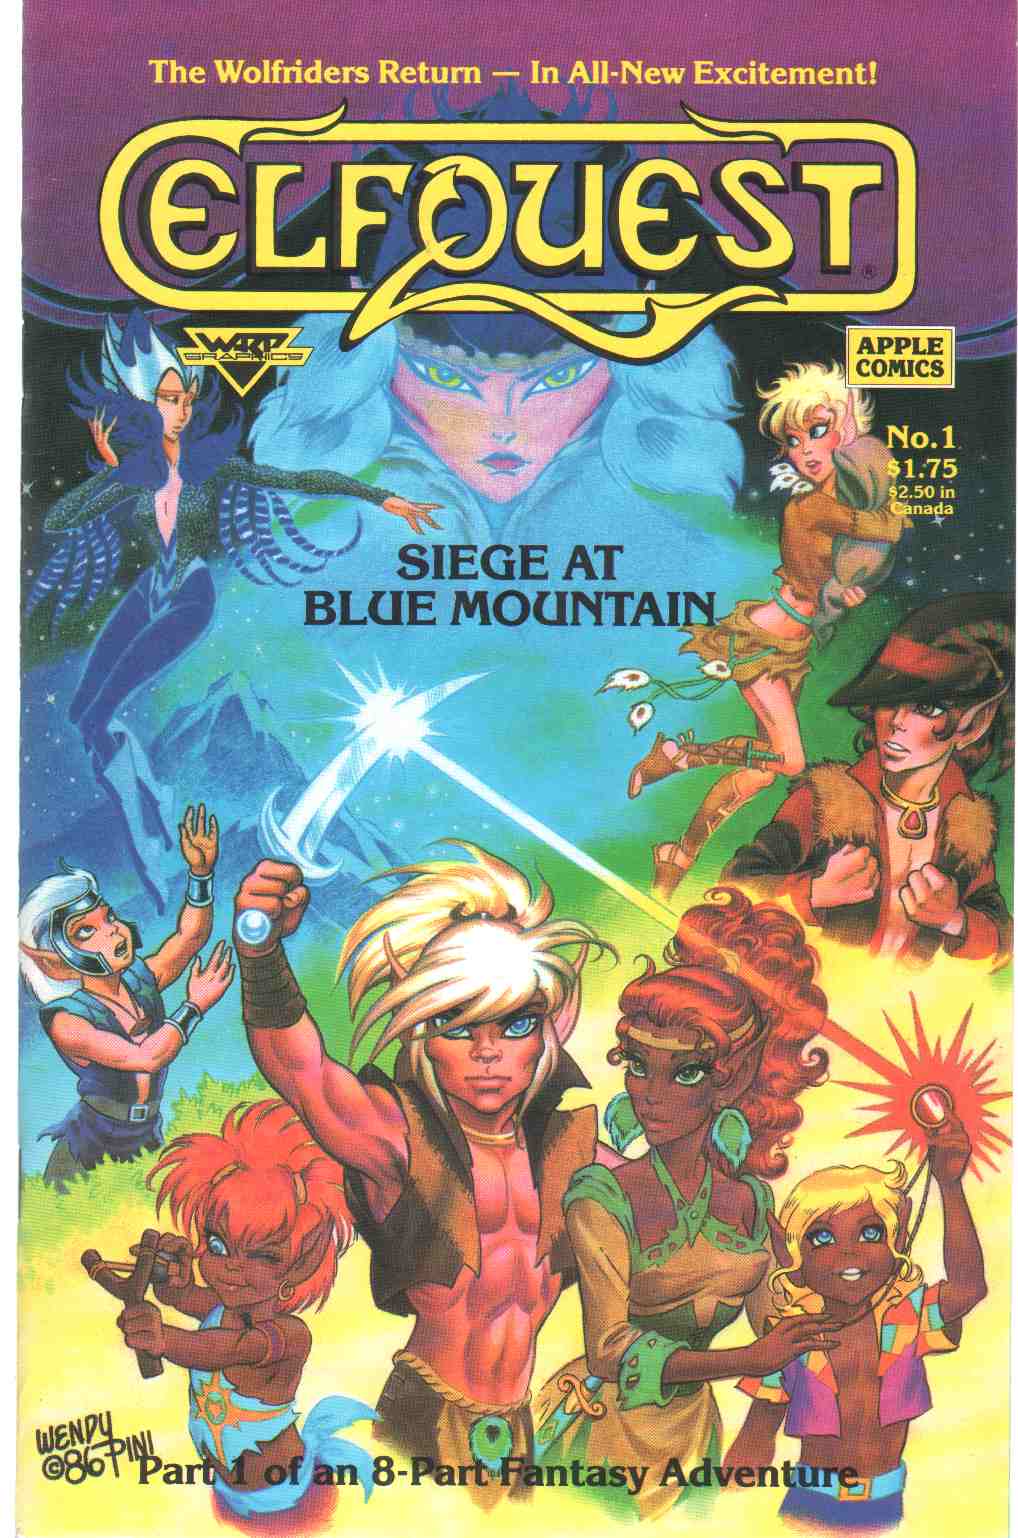 Image for ELFQUEST, SIEGE AT BLUE MOUNTAIN, NO. 1, MARCH 1987